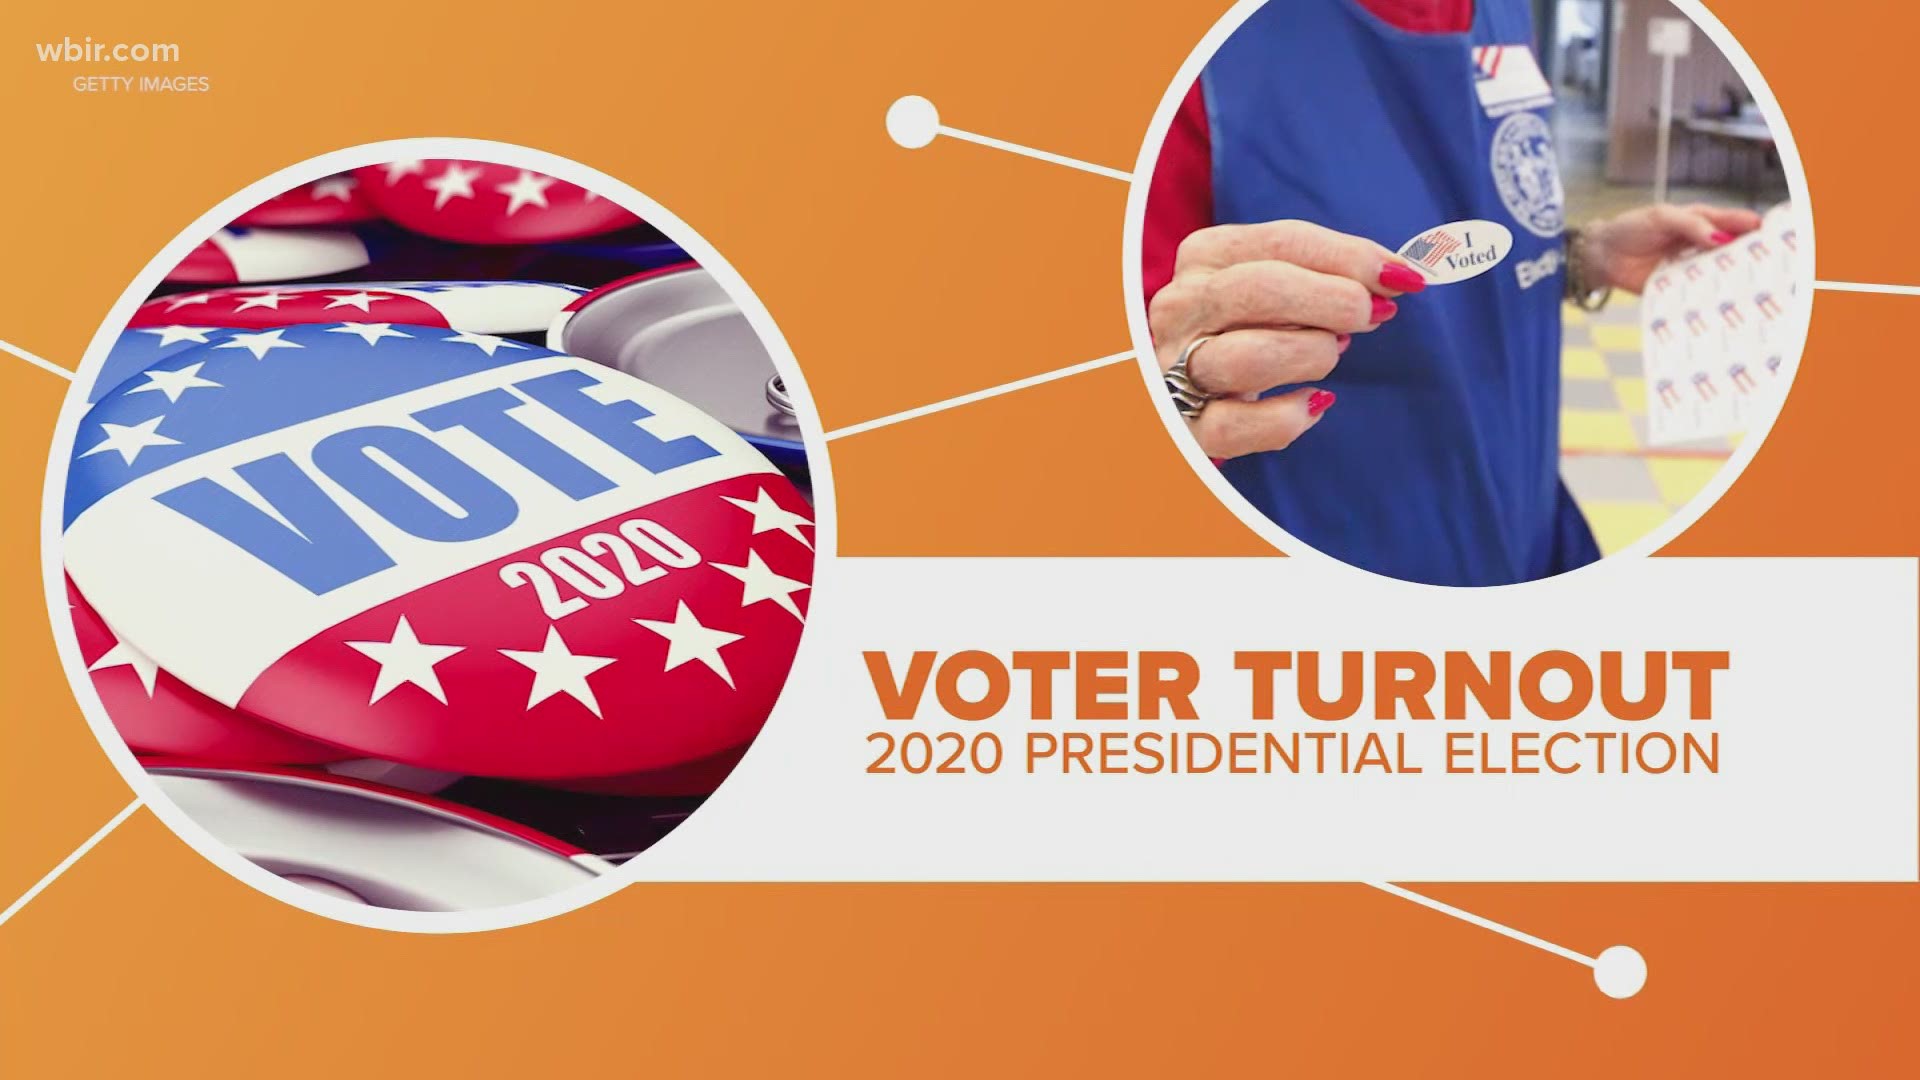 Voter turnout could be a key factor in this year's presidential race and we are already seeing signs of where it is heading in this election.